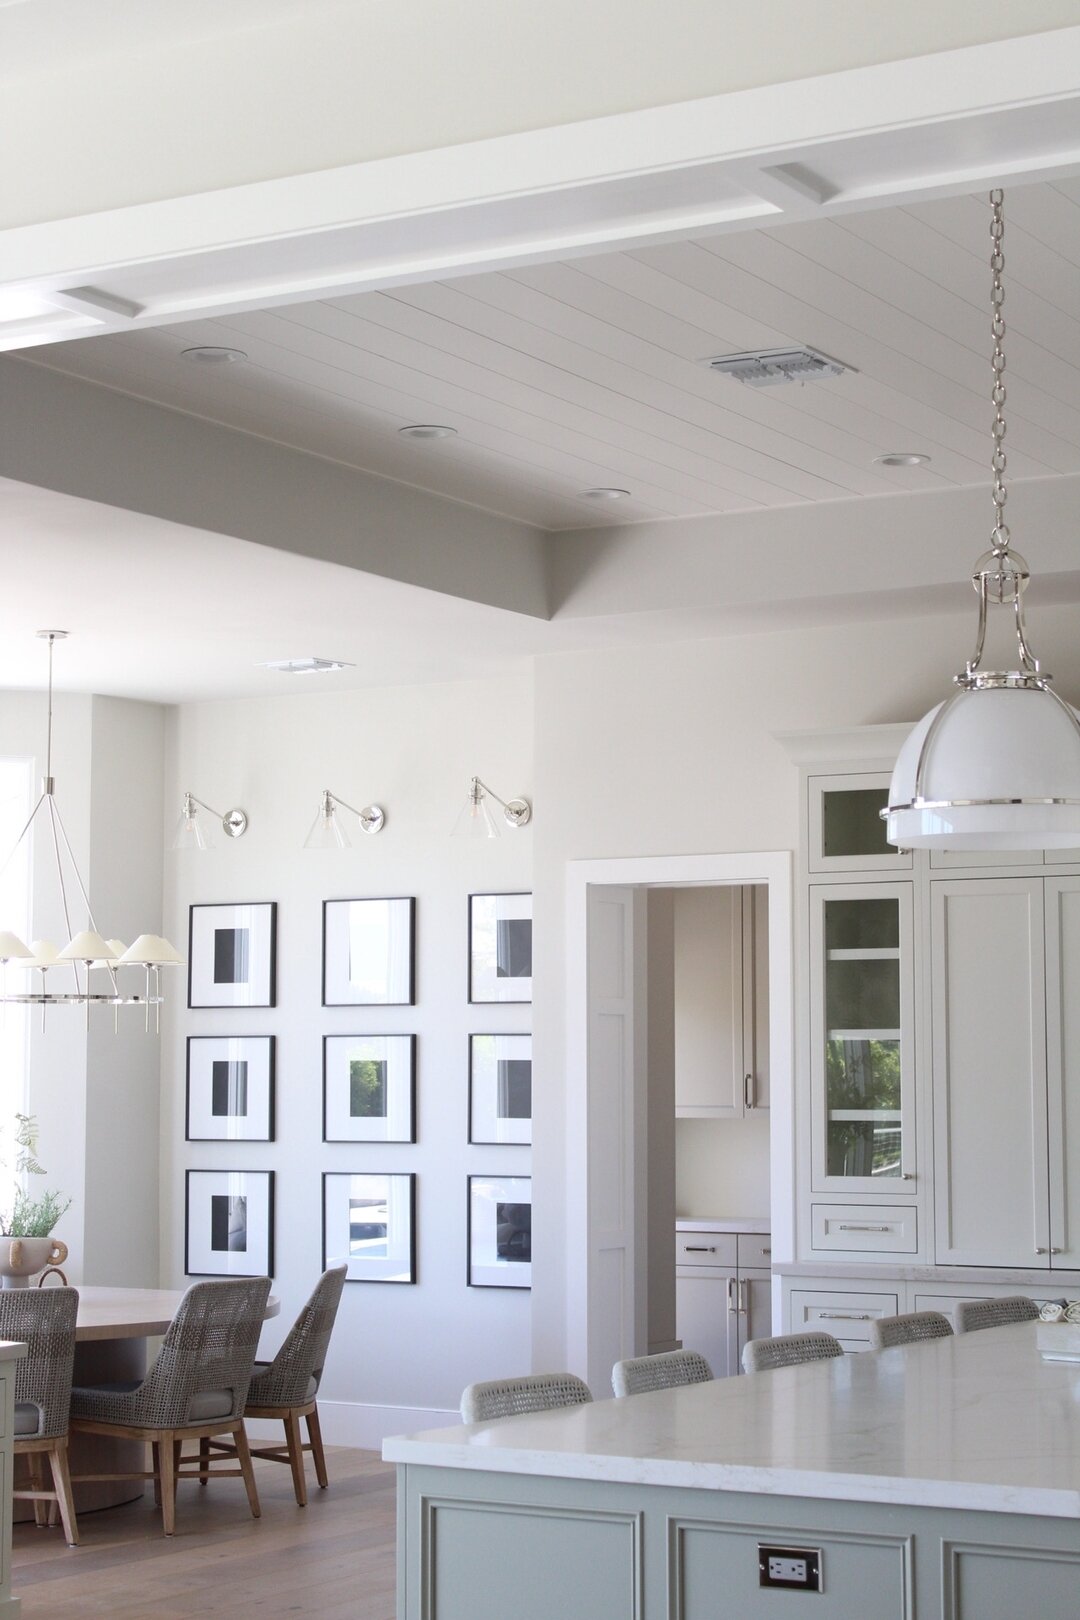 Creating ceilings that make a statement 👀

Color: SW Alabaster